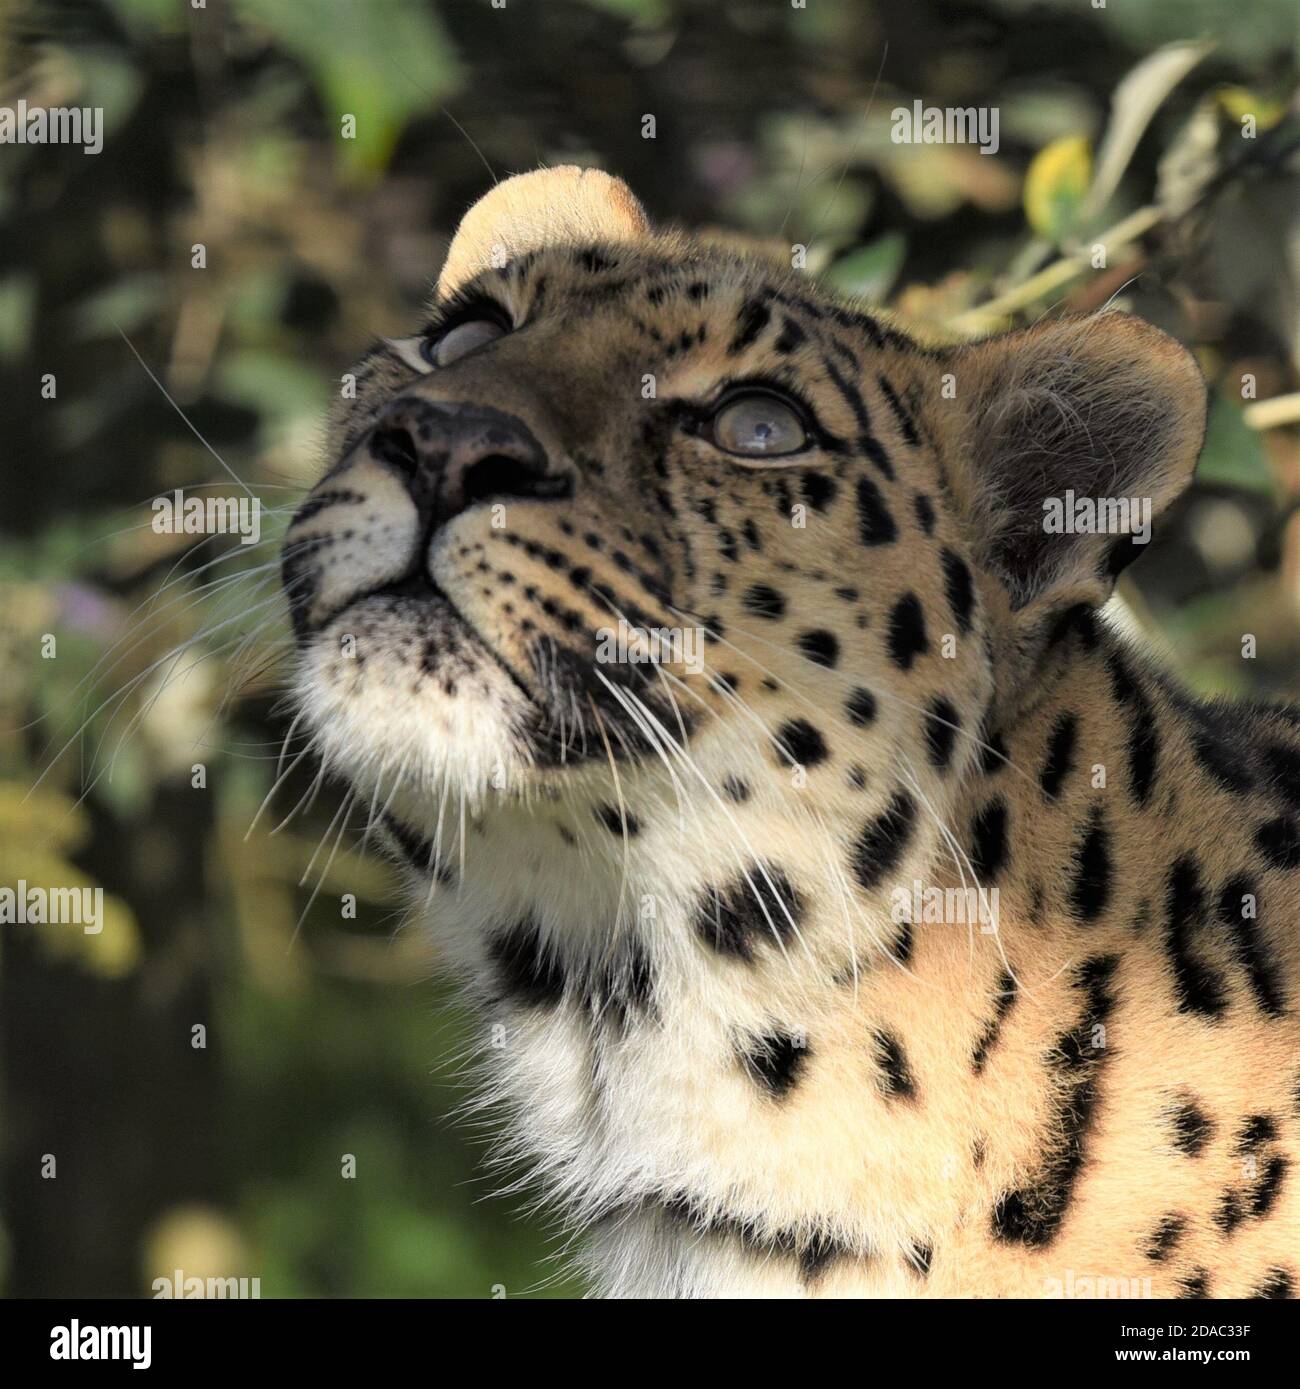 'amur leopard', 'Asian leopard', 'wildlife', 'conservation', 'Protected species', 'beautiful eyes', 'looking up', 'concentration', 'prey spotted' Stock Photo